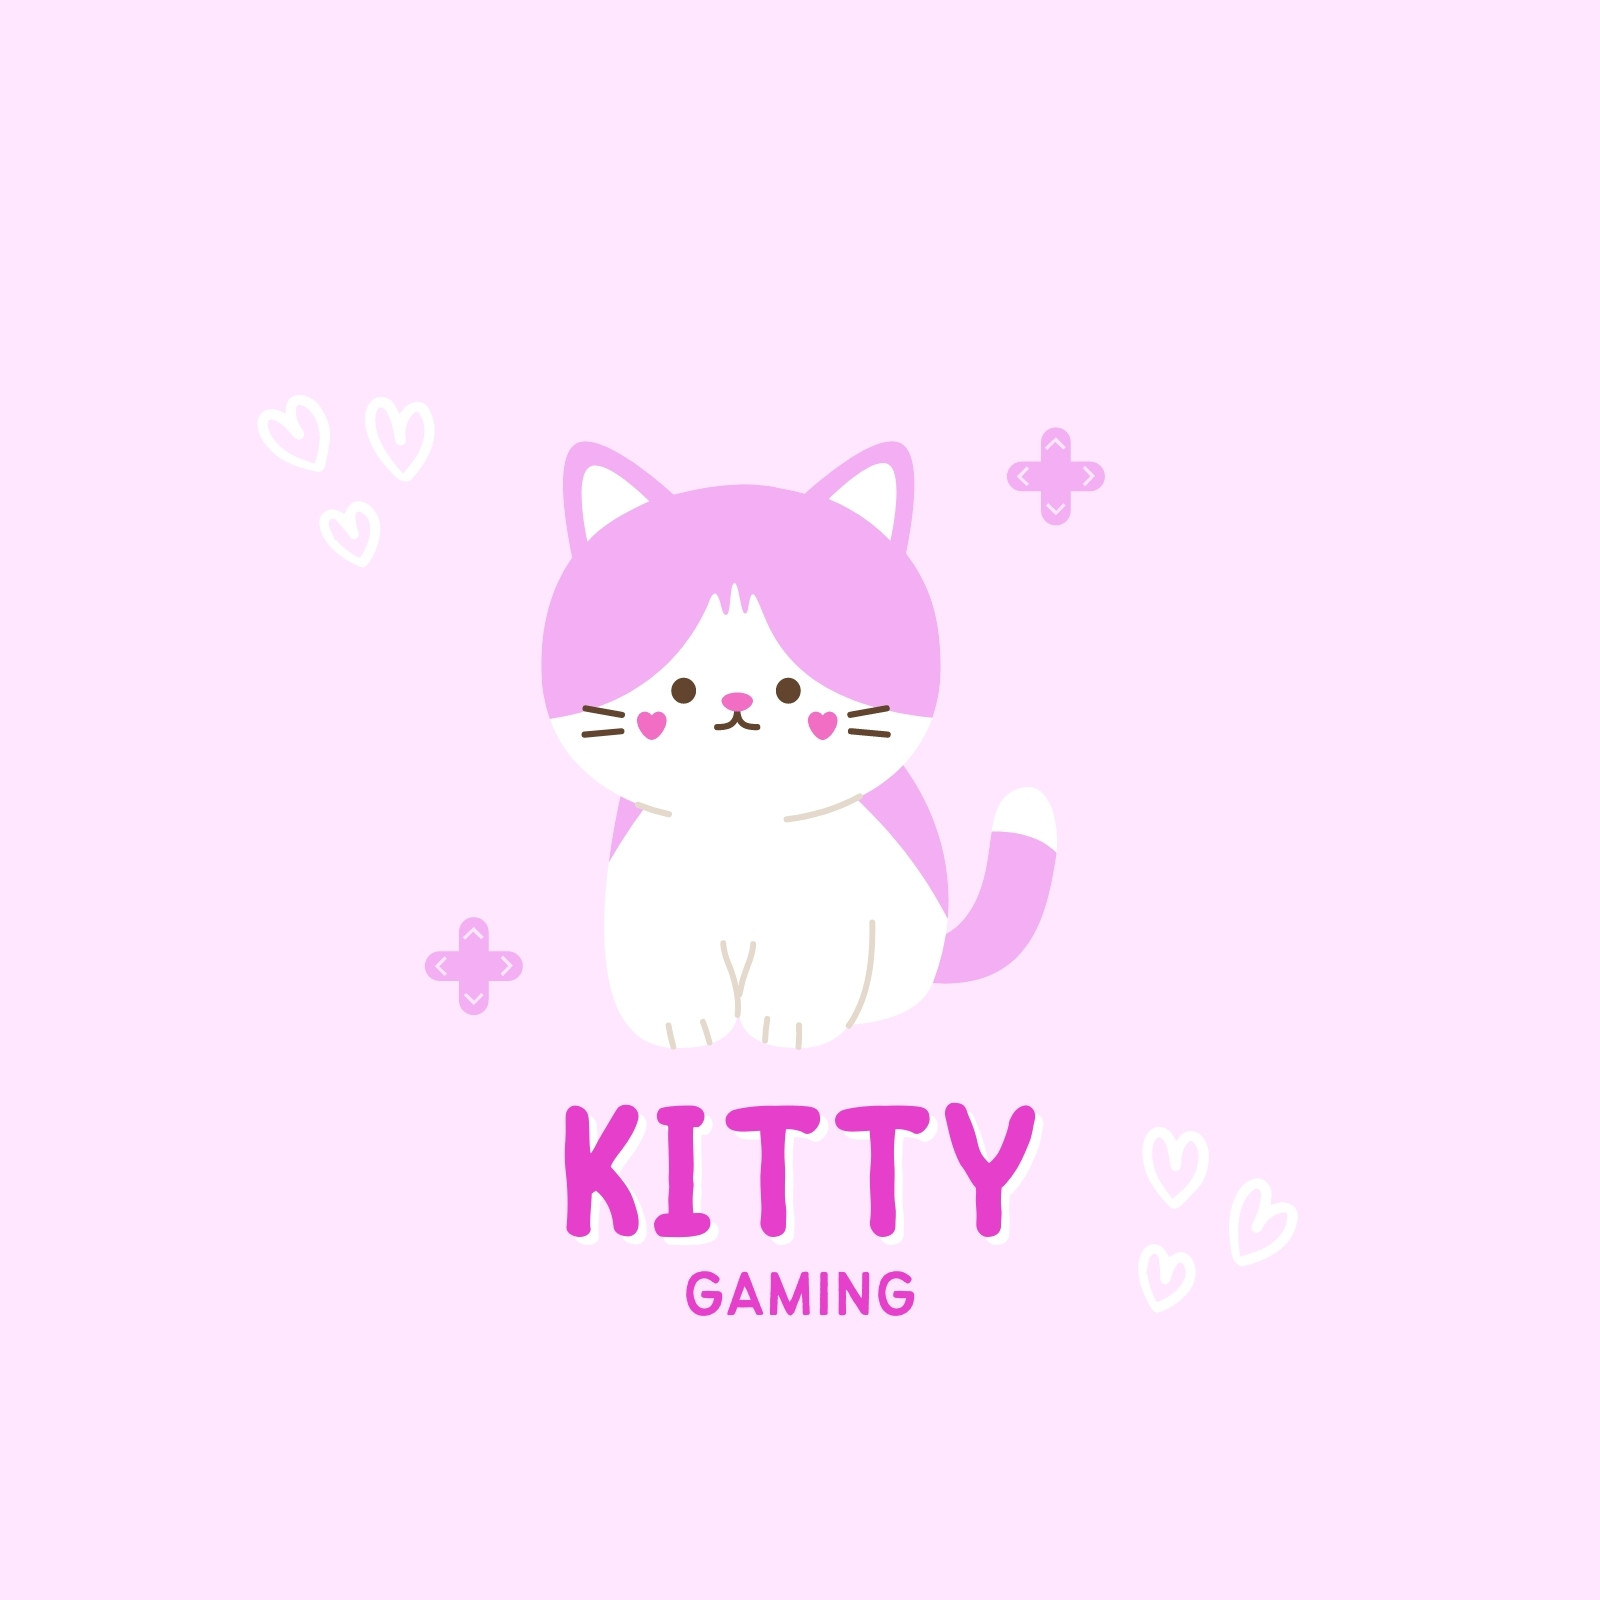 Cats are Cute app icon brown aesthetic em 2023